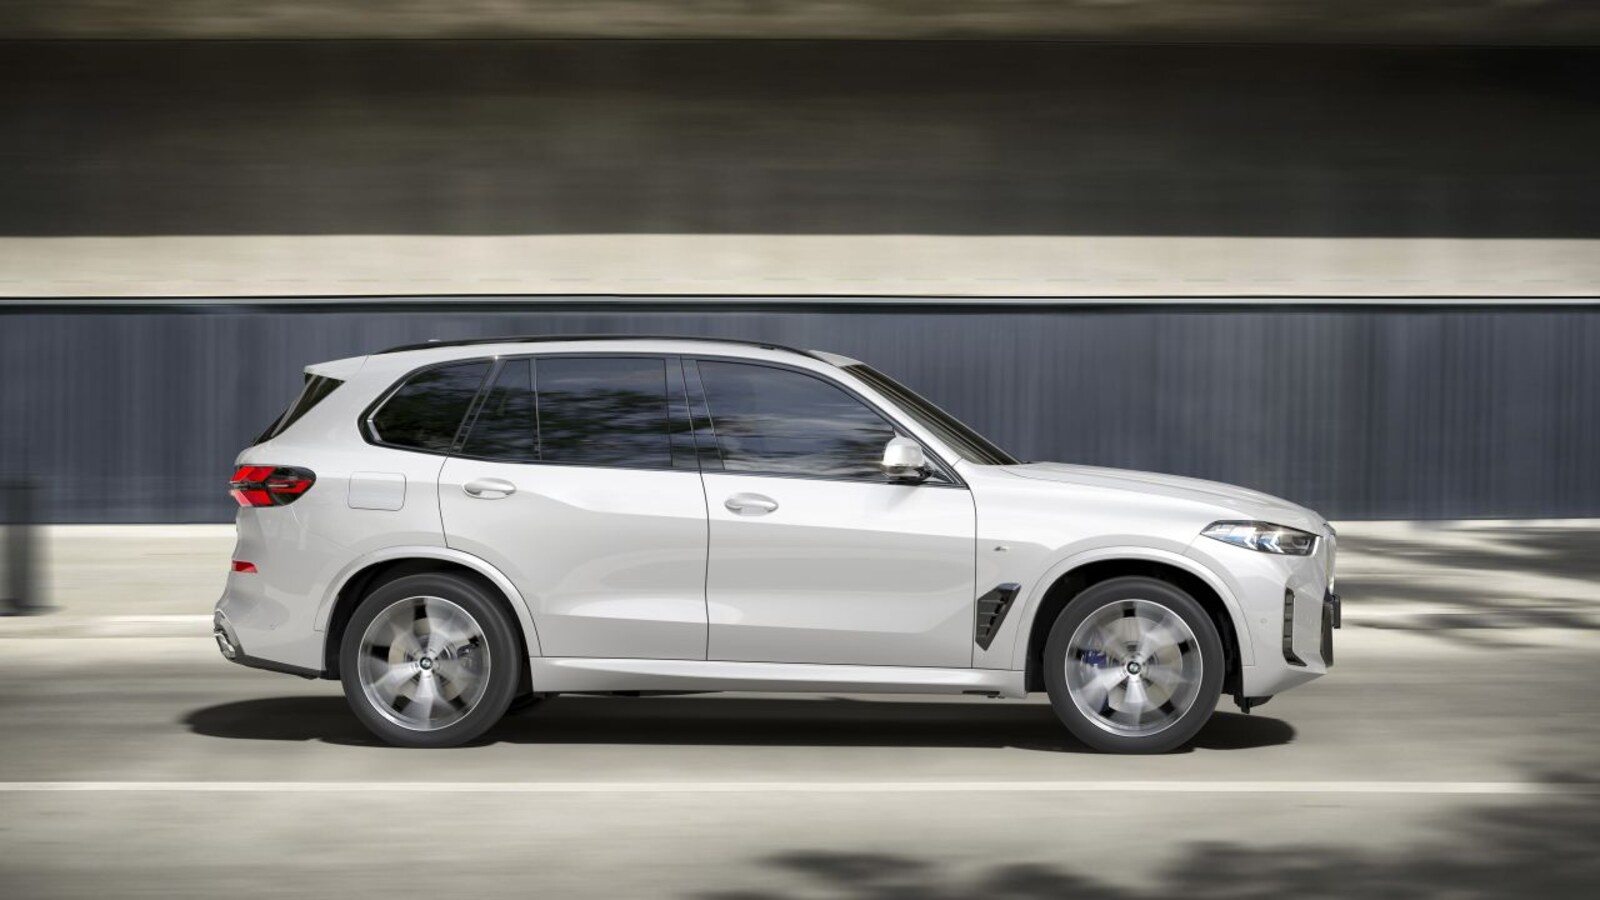 The new BMW X5 has finally made it to India at a cheaper price tag